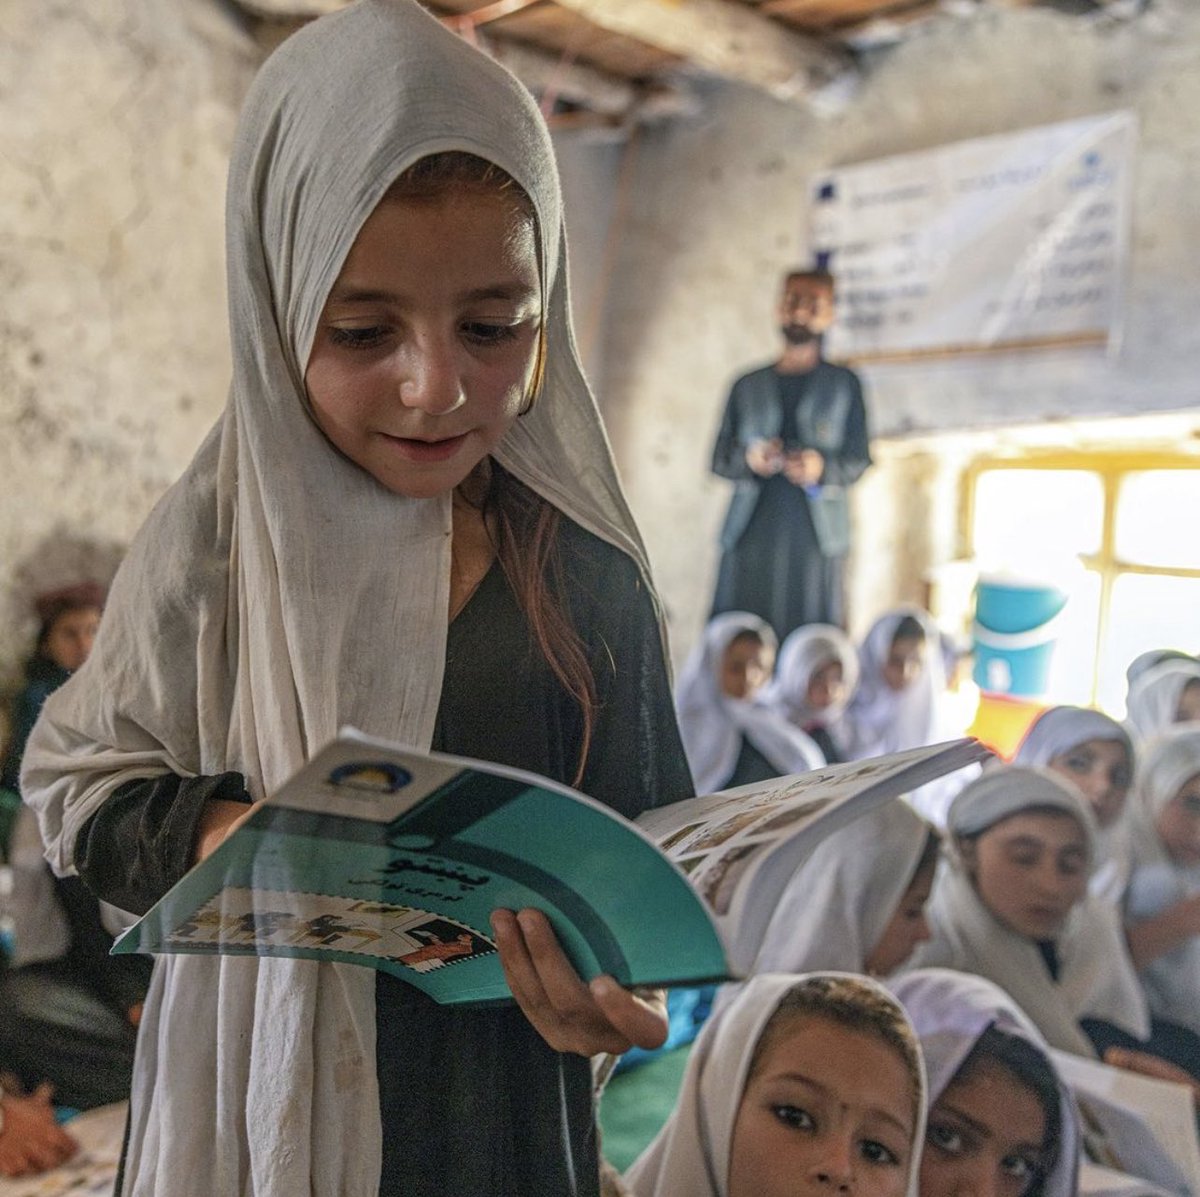 DAY: 949  🏫
DAY: 489 🎓
#Afghanistan is the only country on earth that bans women & girls from going to #school & university.
#StopGenderApartheid #RecognizeGenderApartheidInAfghanistan #LetAfghanGirlsLearn